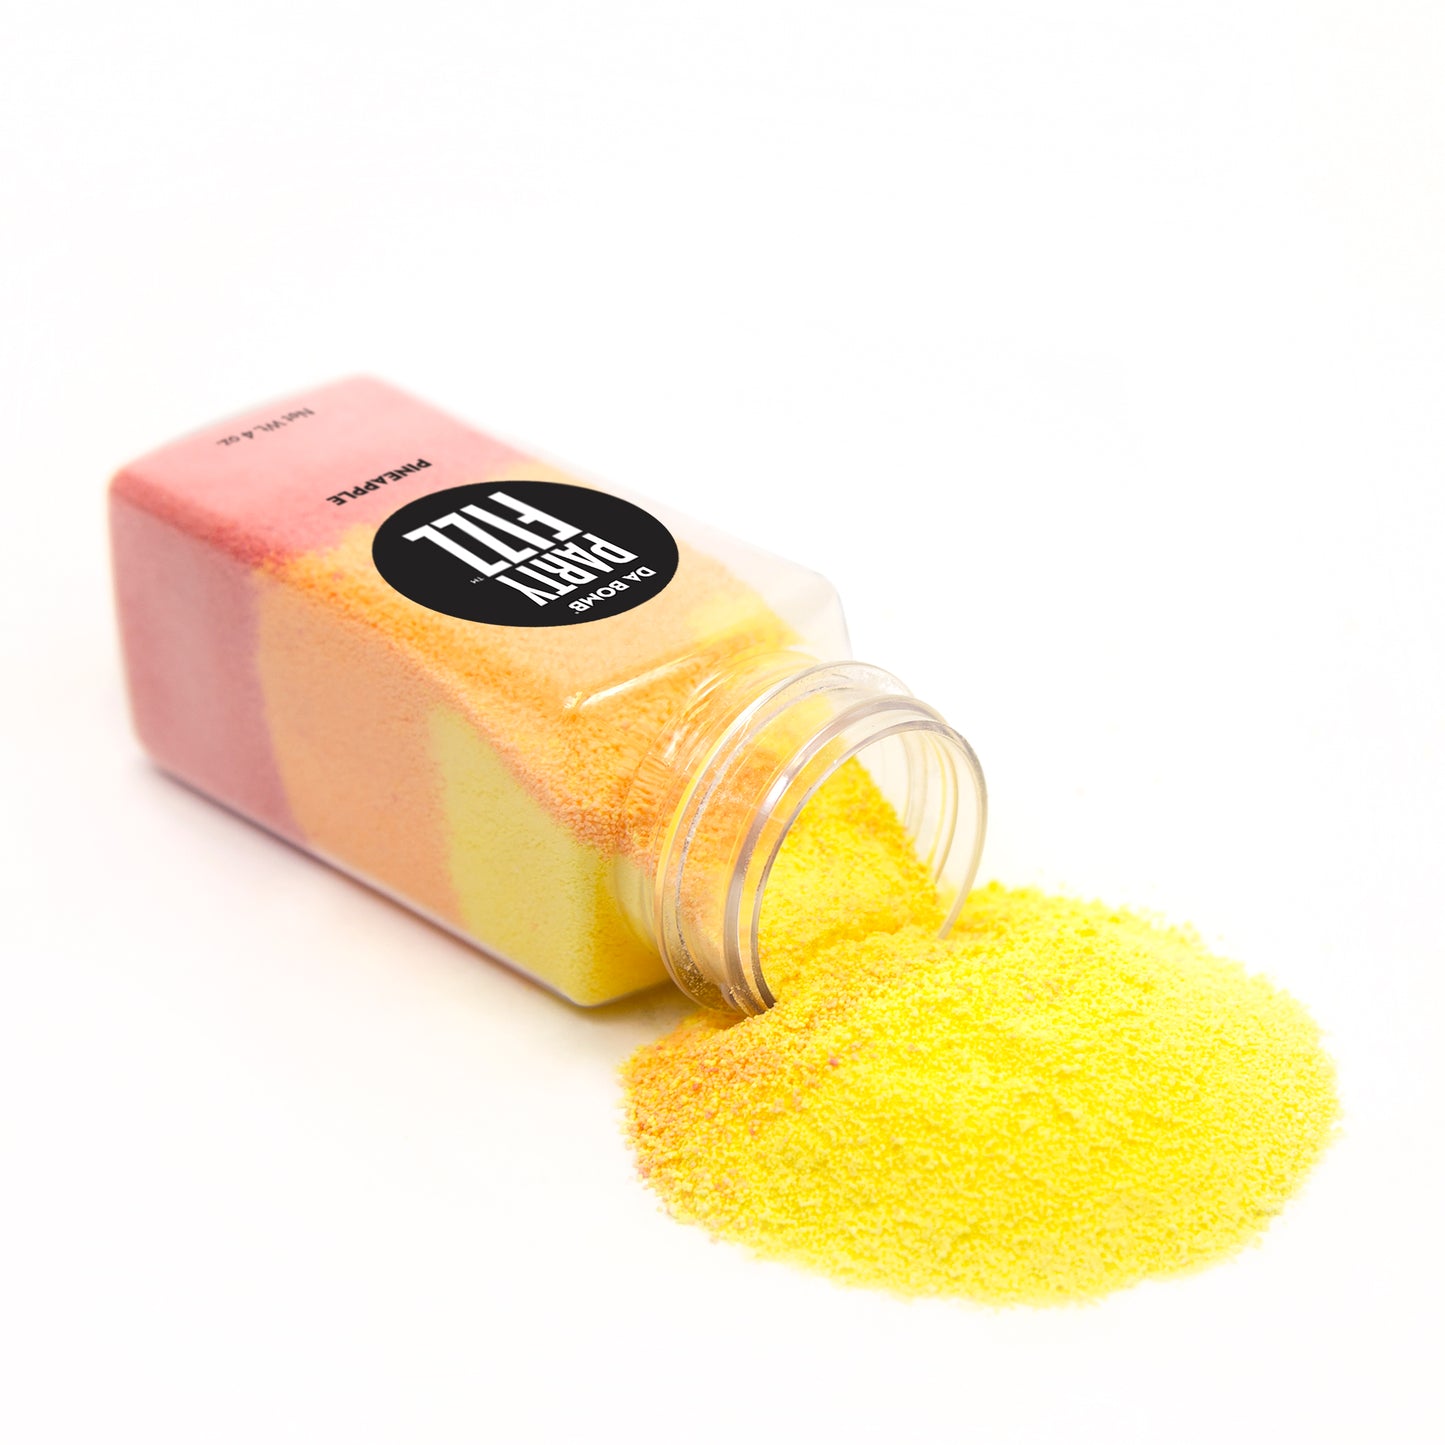 Clear mini jar with yellow, red and orange fizz spilling out of it onto a white background.